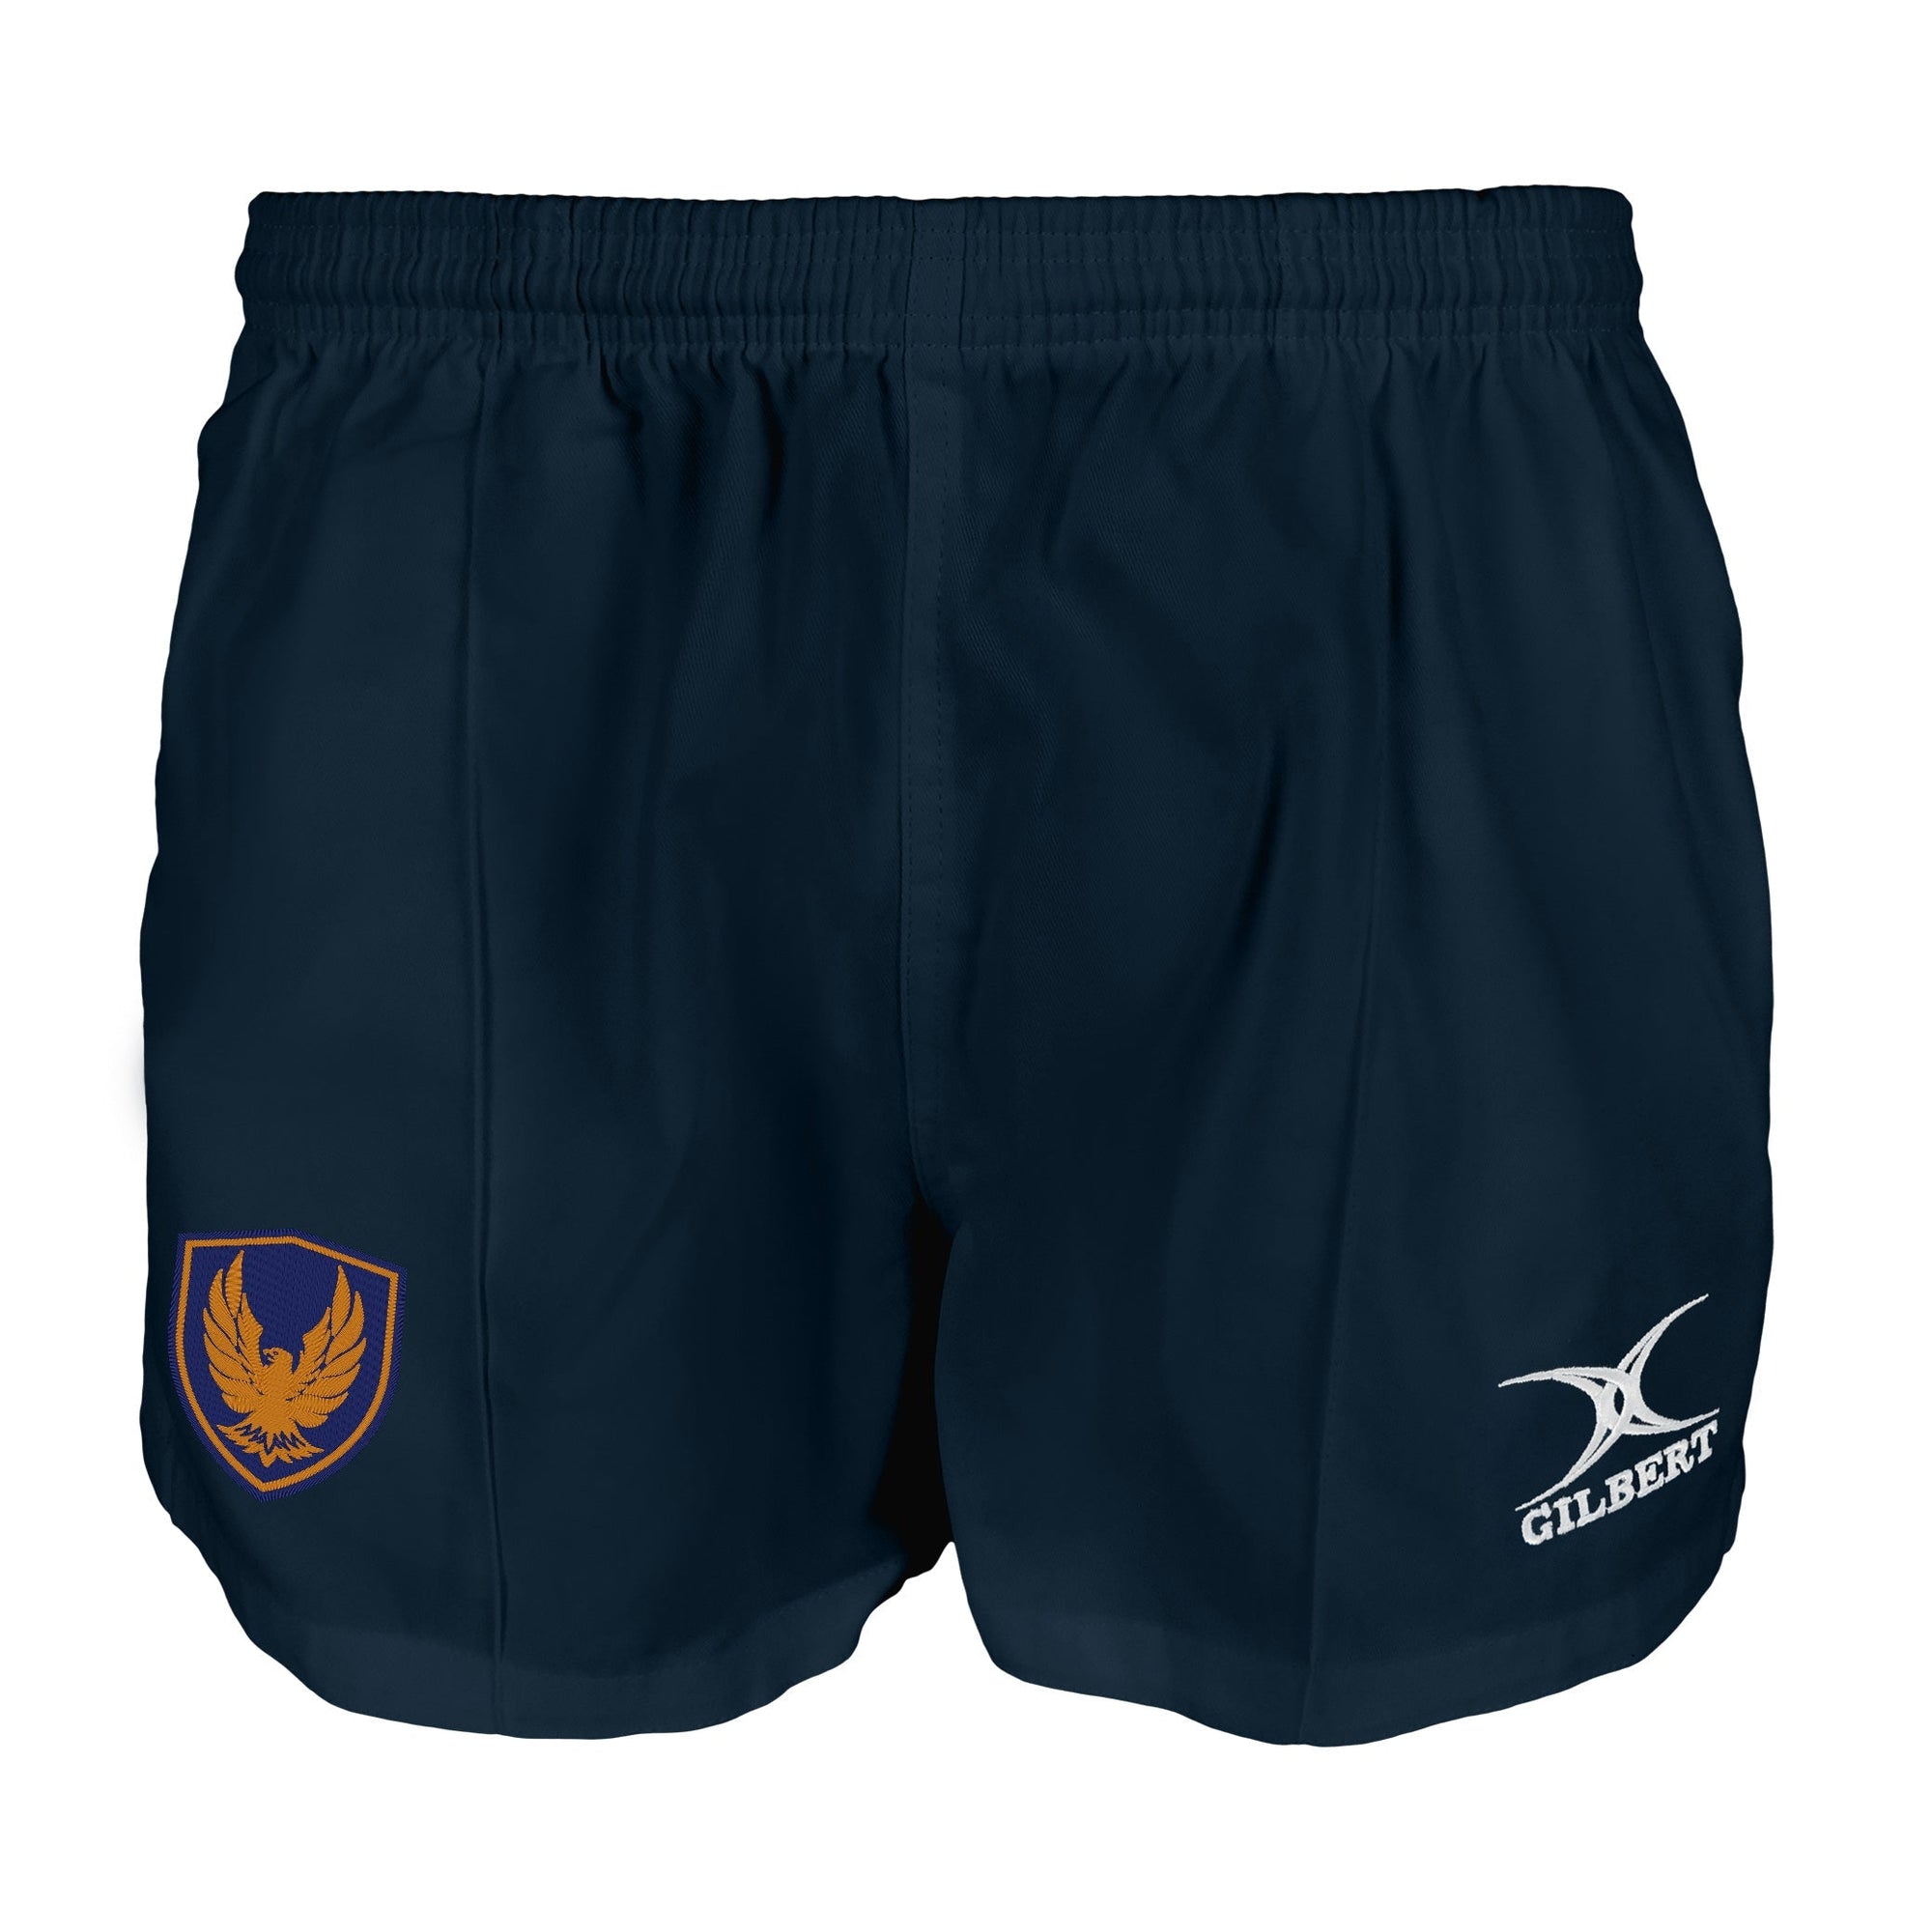 Rugby Imports GHFH Rugby Gilbert Kiwi Pro Short